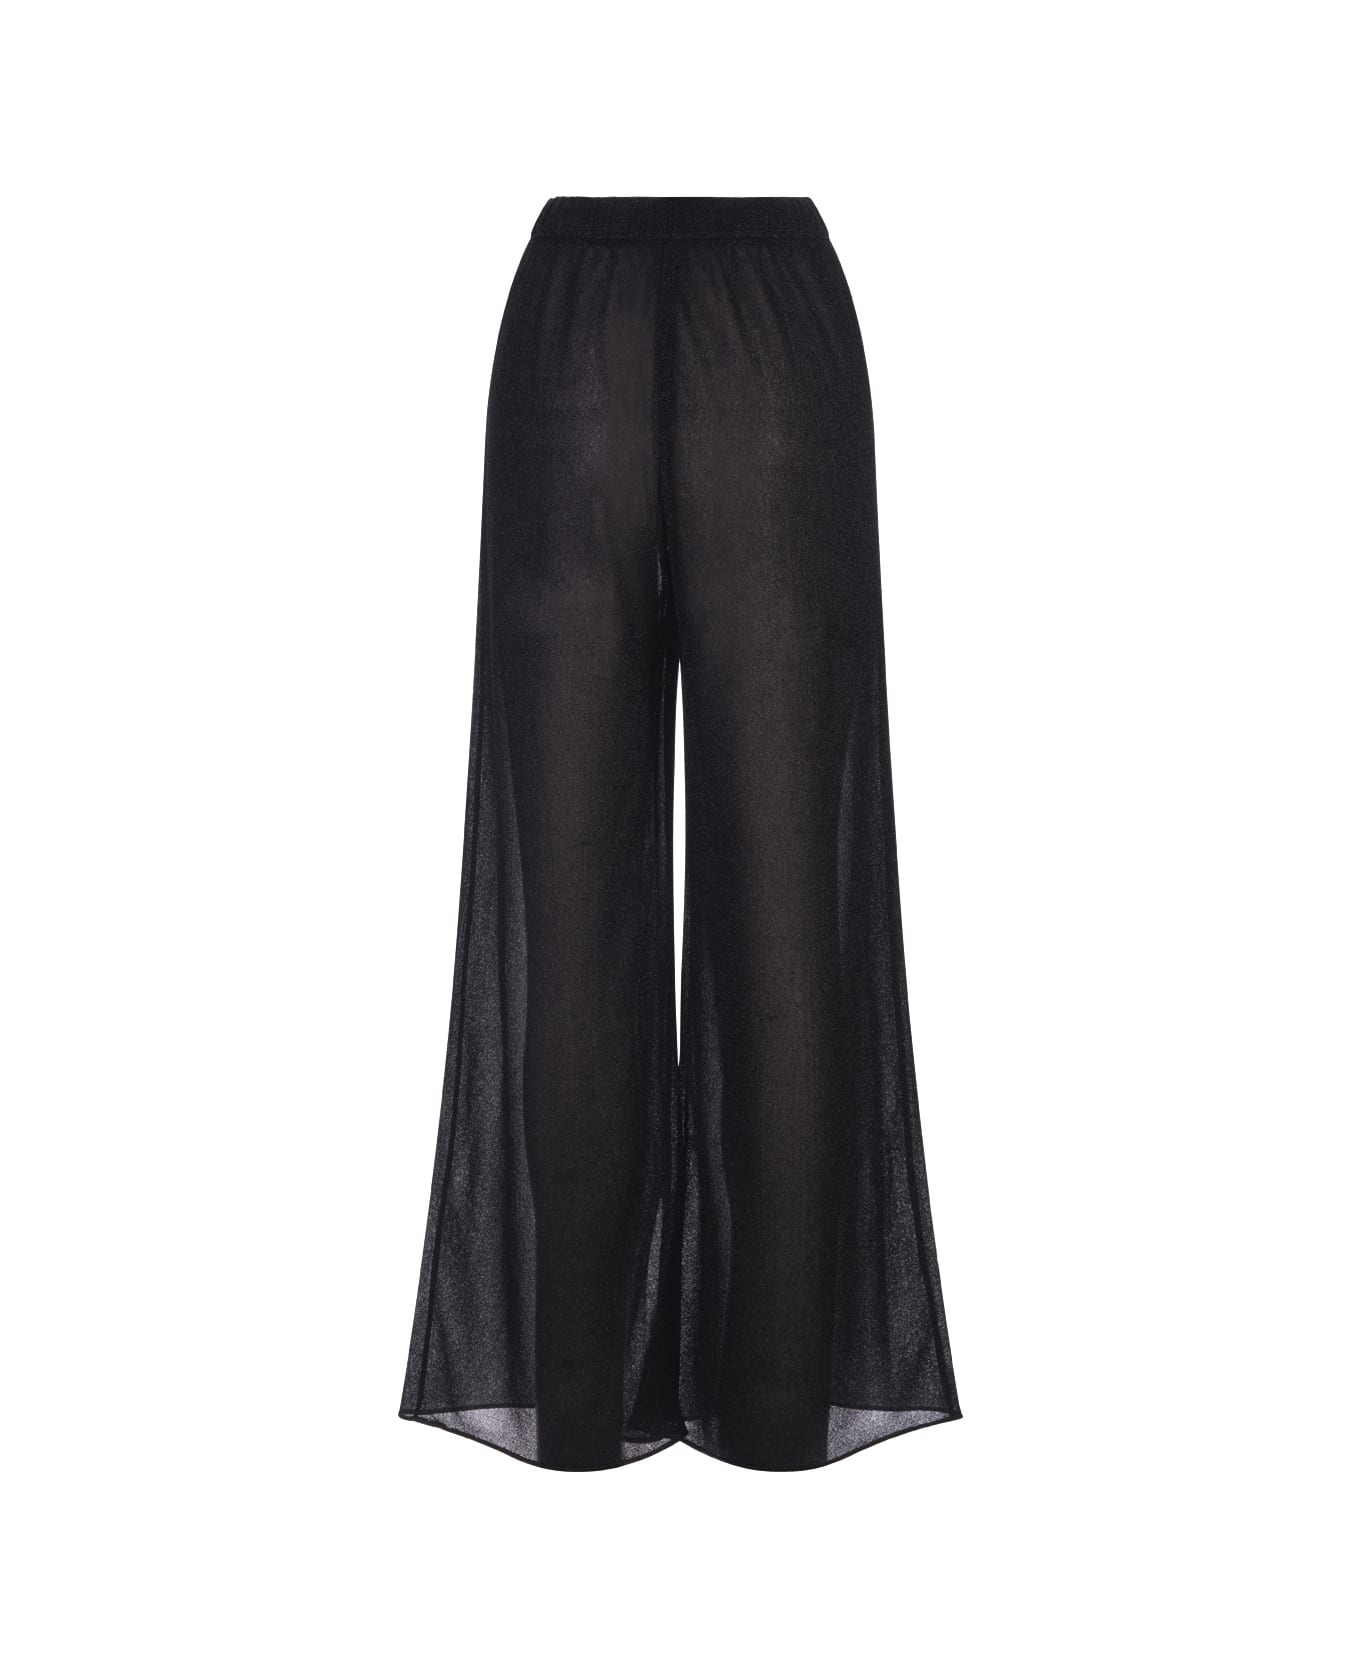 Oseree Black Lumiere Trousers - Black